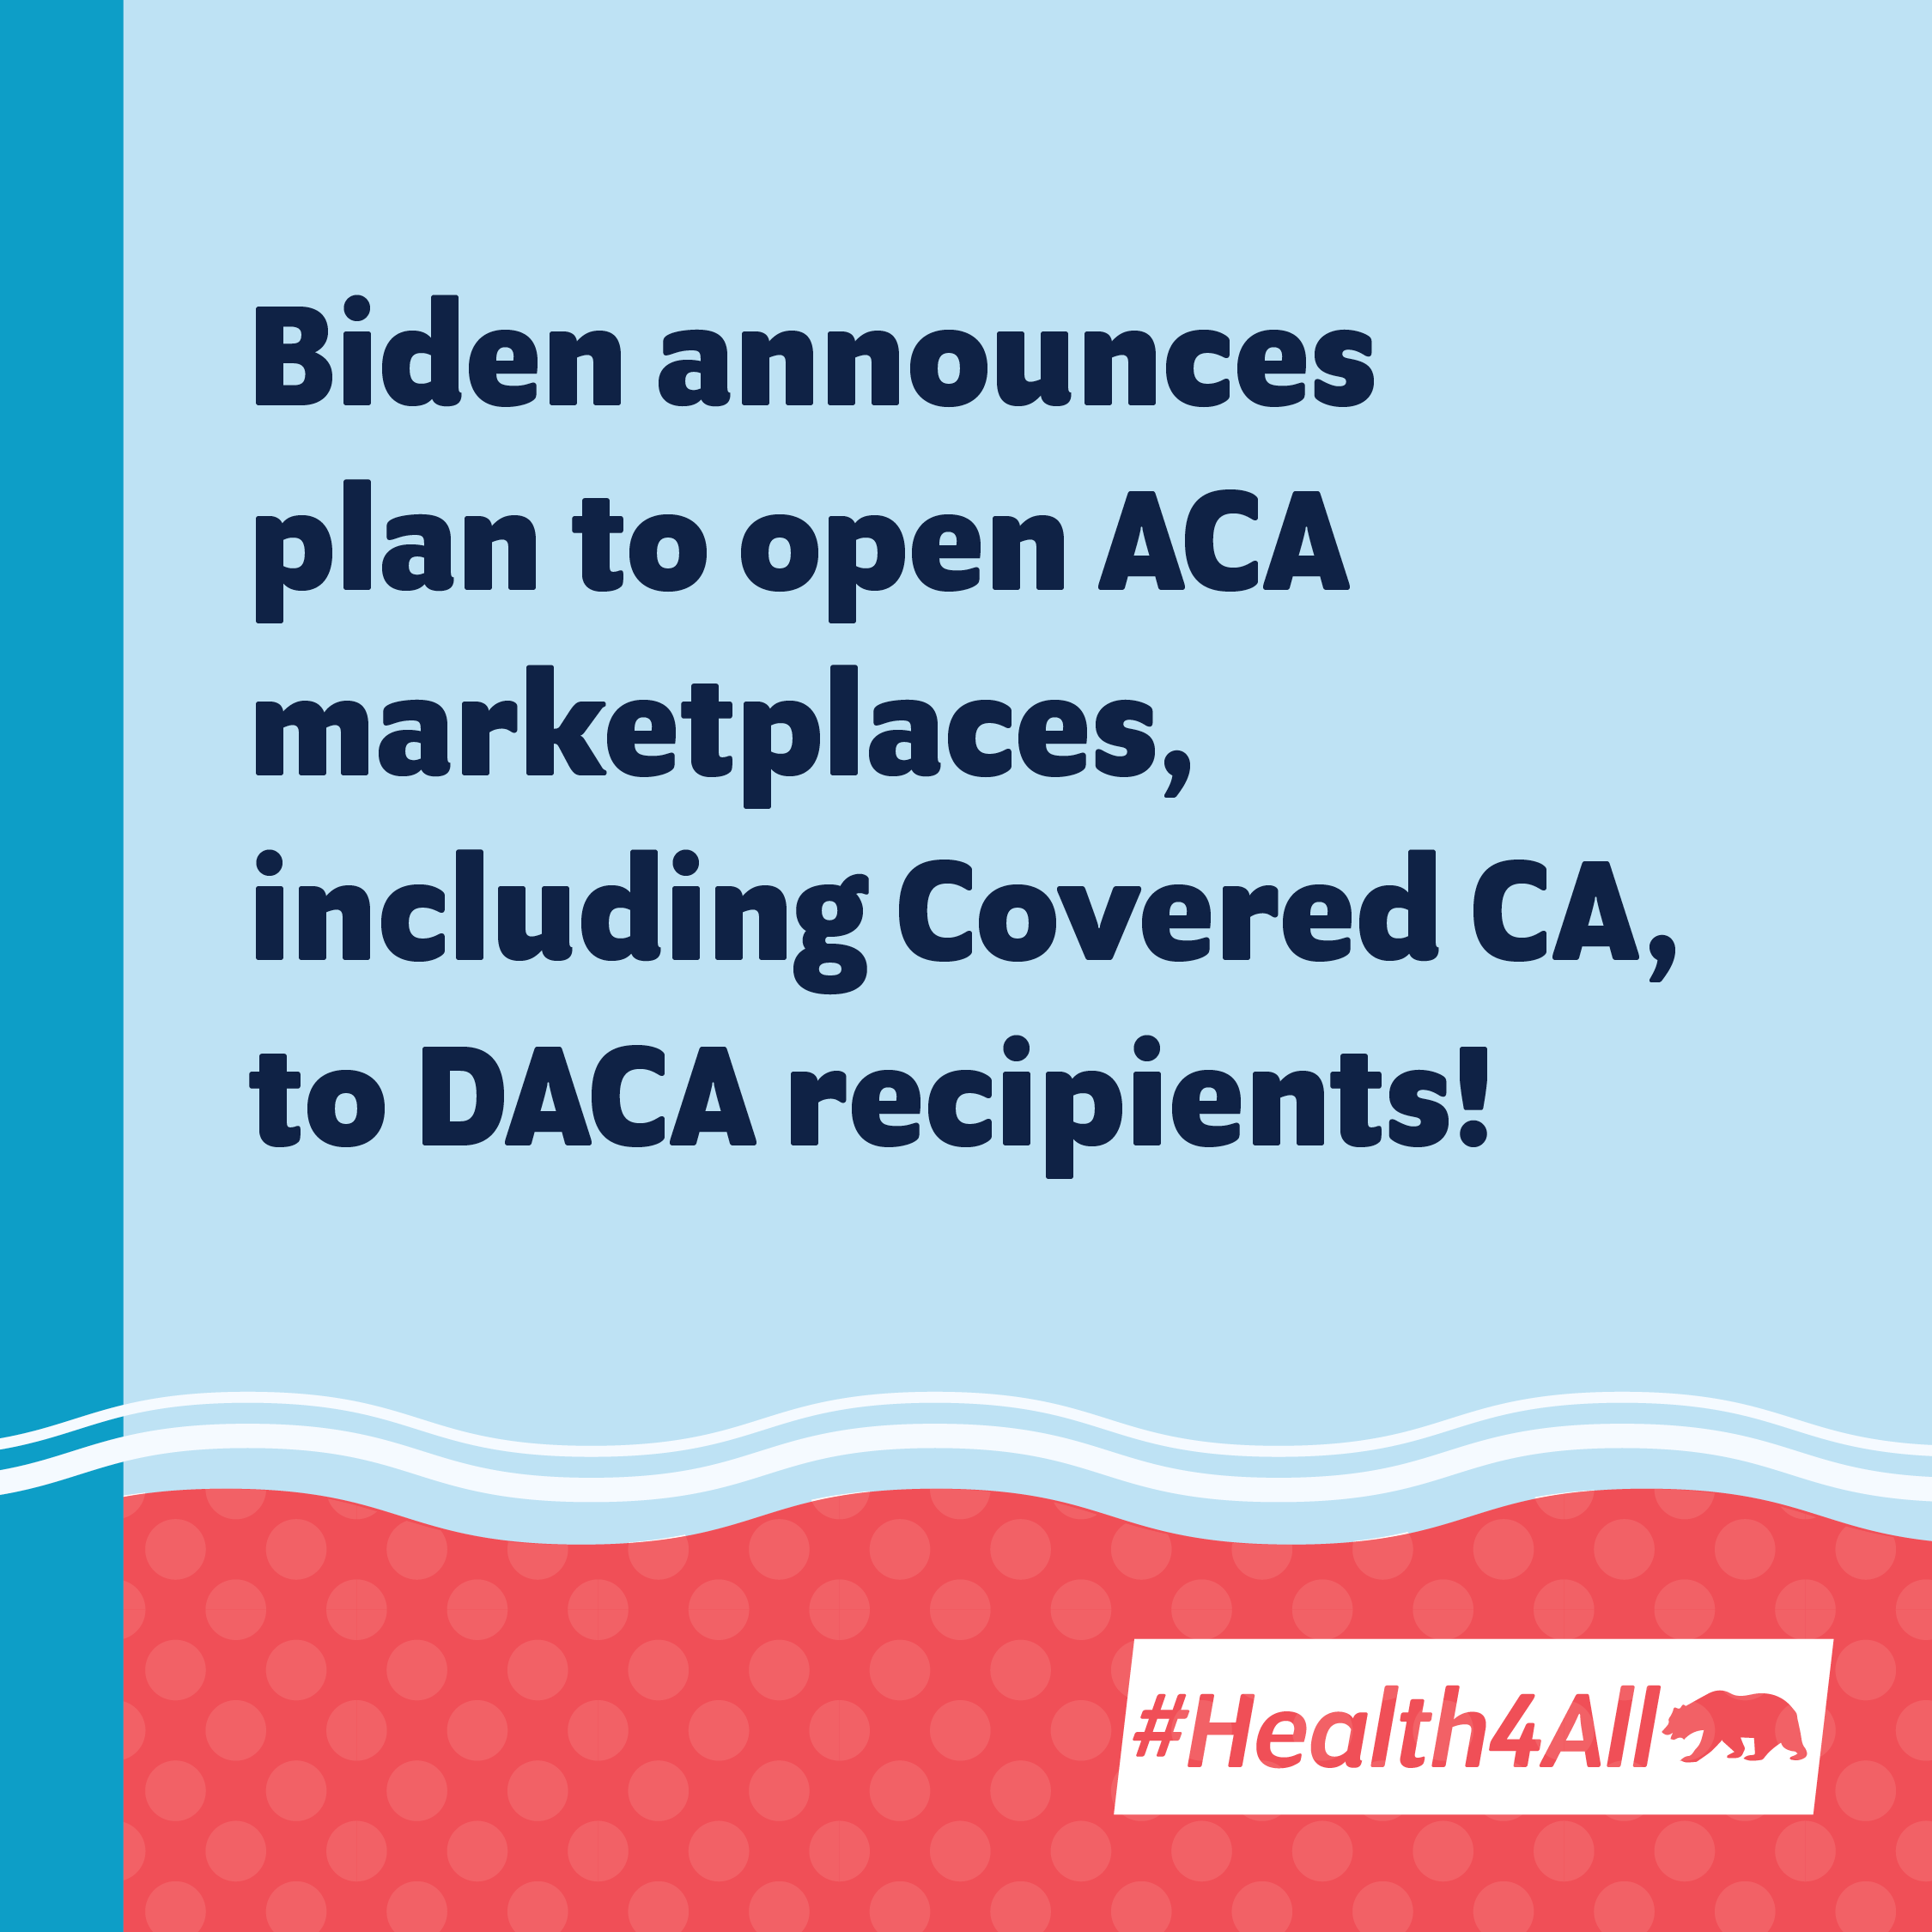 Statement on Biden Administration’s Expansion of Health Care Access to DACA Recipients